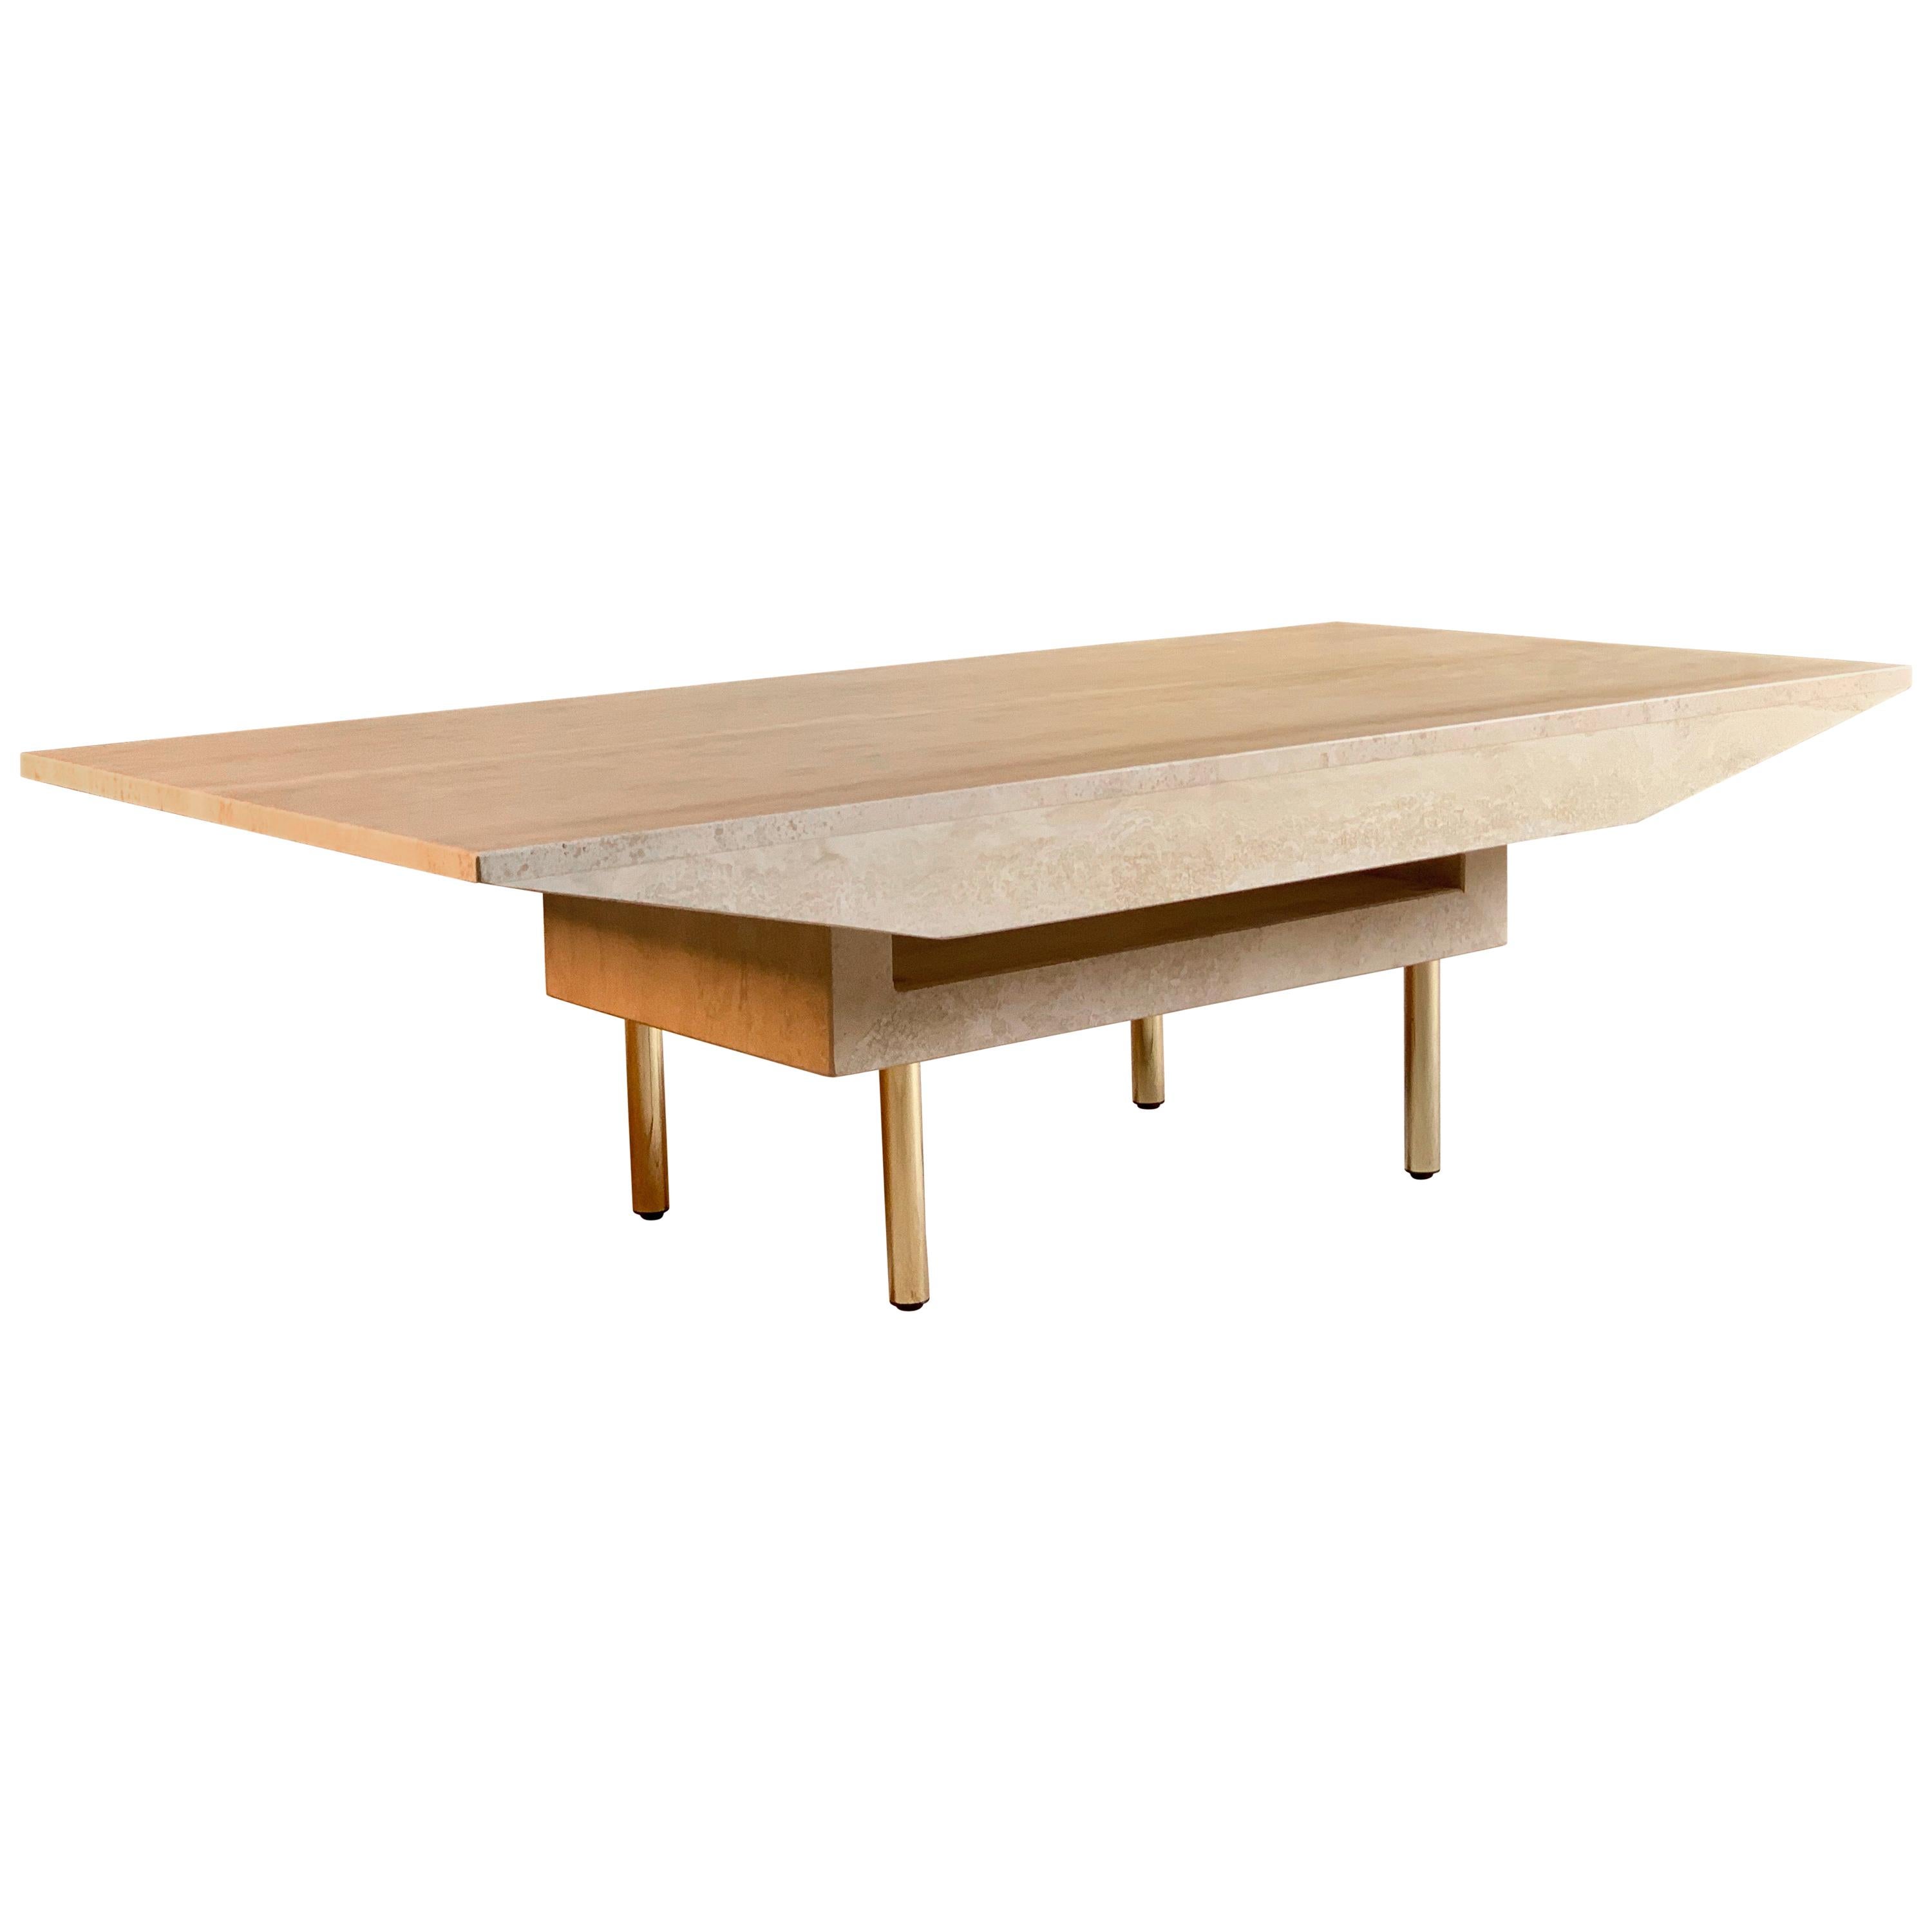 Italian Travertine marble coffee table rectangular shaped sides on base 

Italian Travertine marble coffee table, the solid rectangular top with shaped sides raises on travertine base with four brass legs.

Condition report: 
Offered in